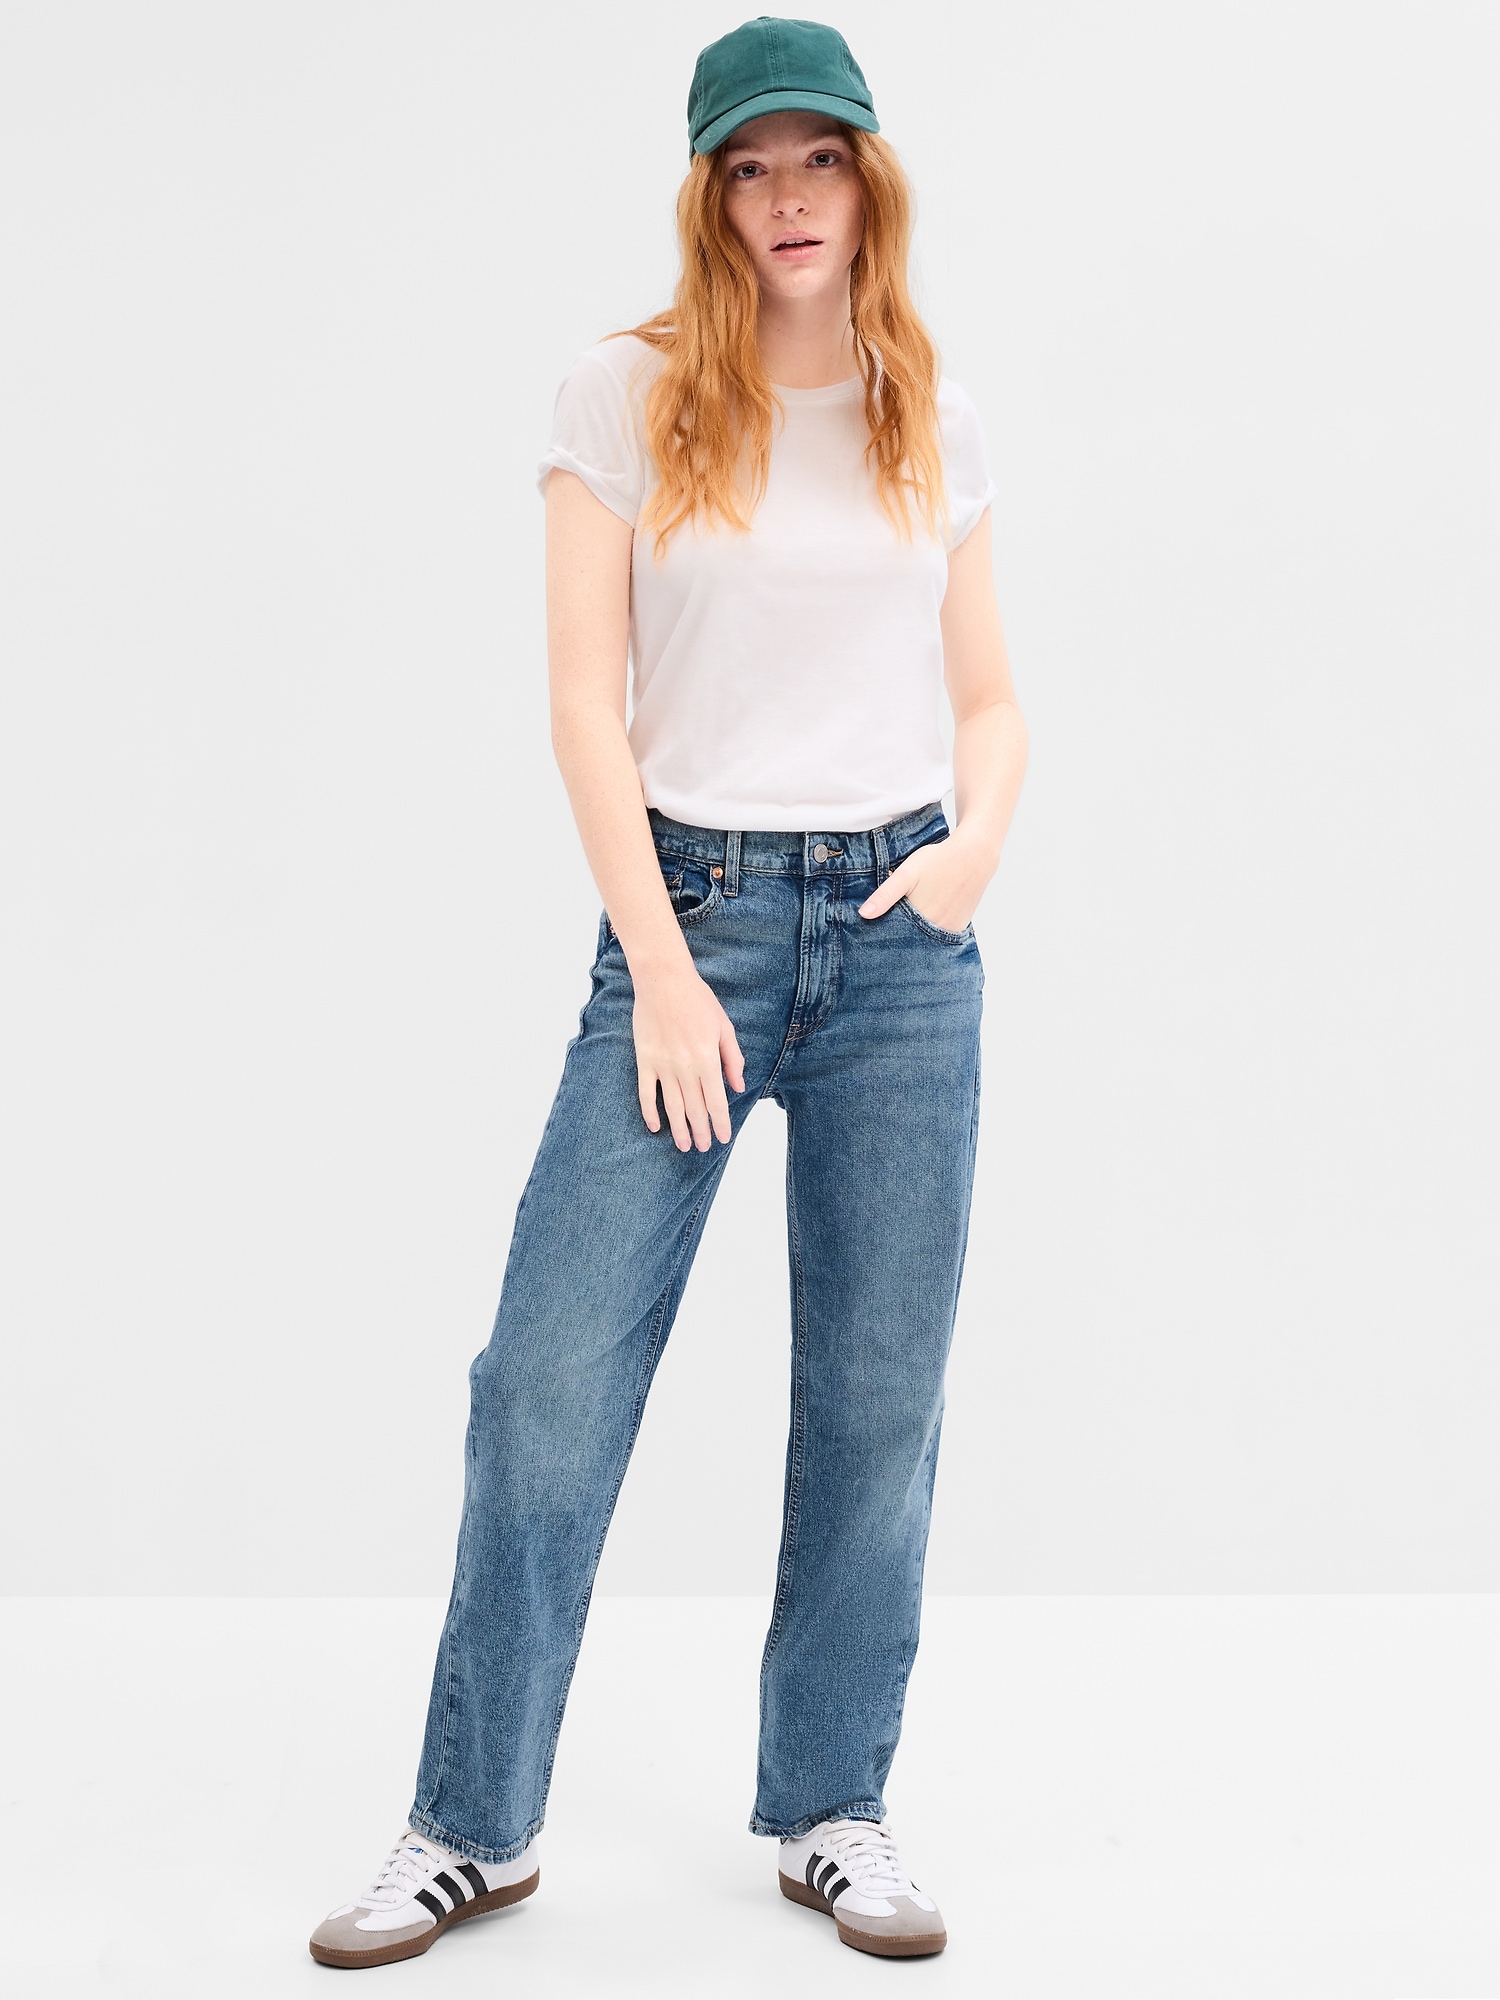 Mid Rise '90s Loose Jeans | Gap Factory